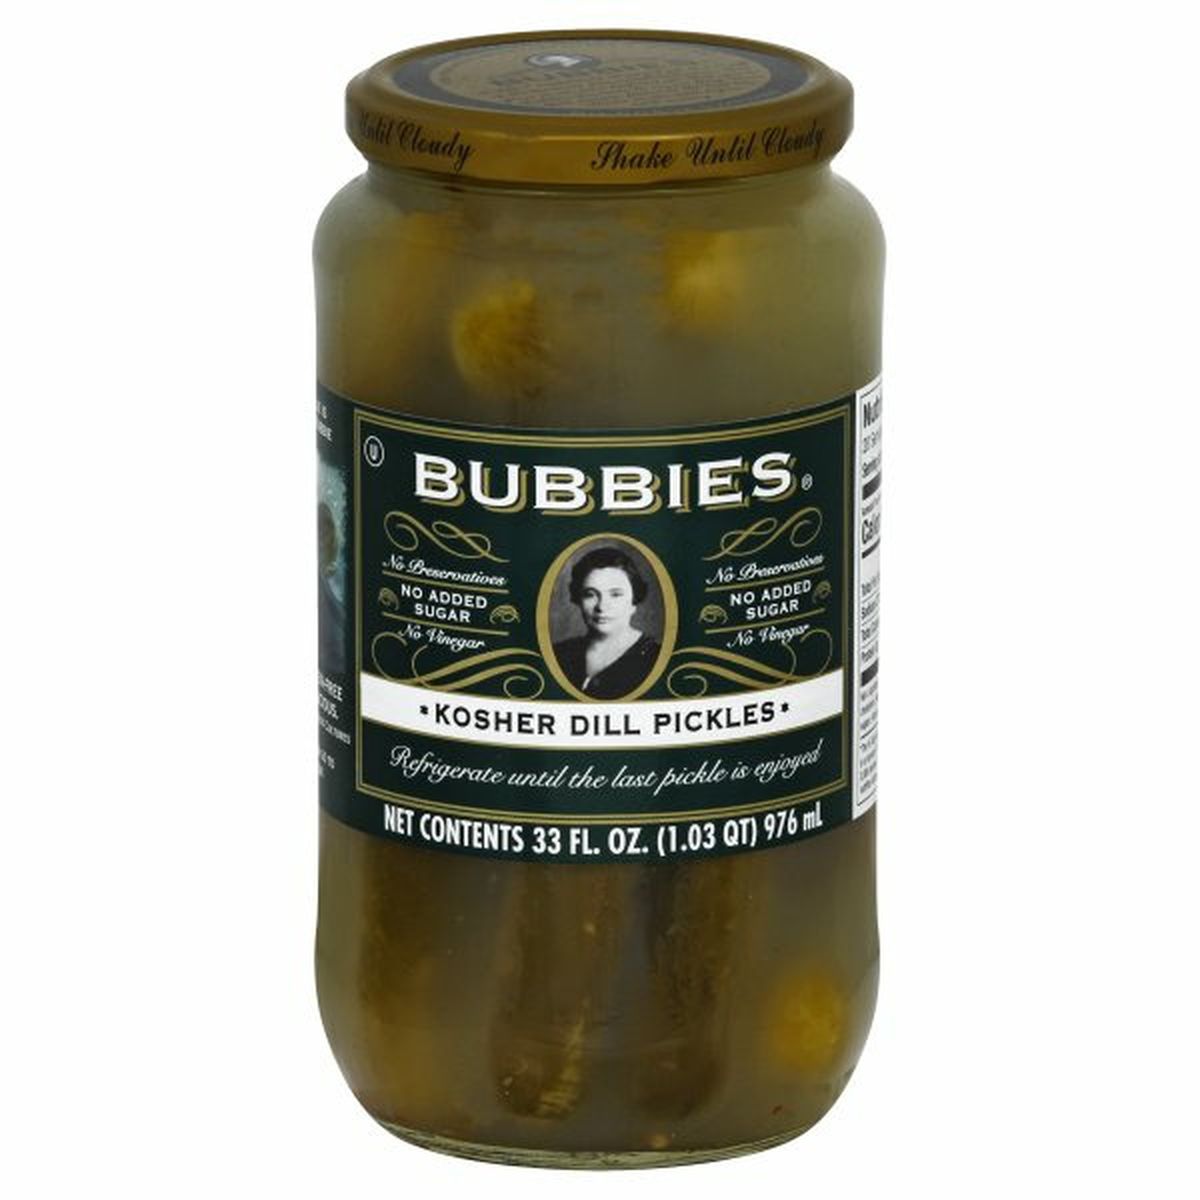 Calories in Bubbies Kosher Dill Pickles